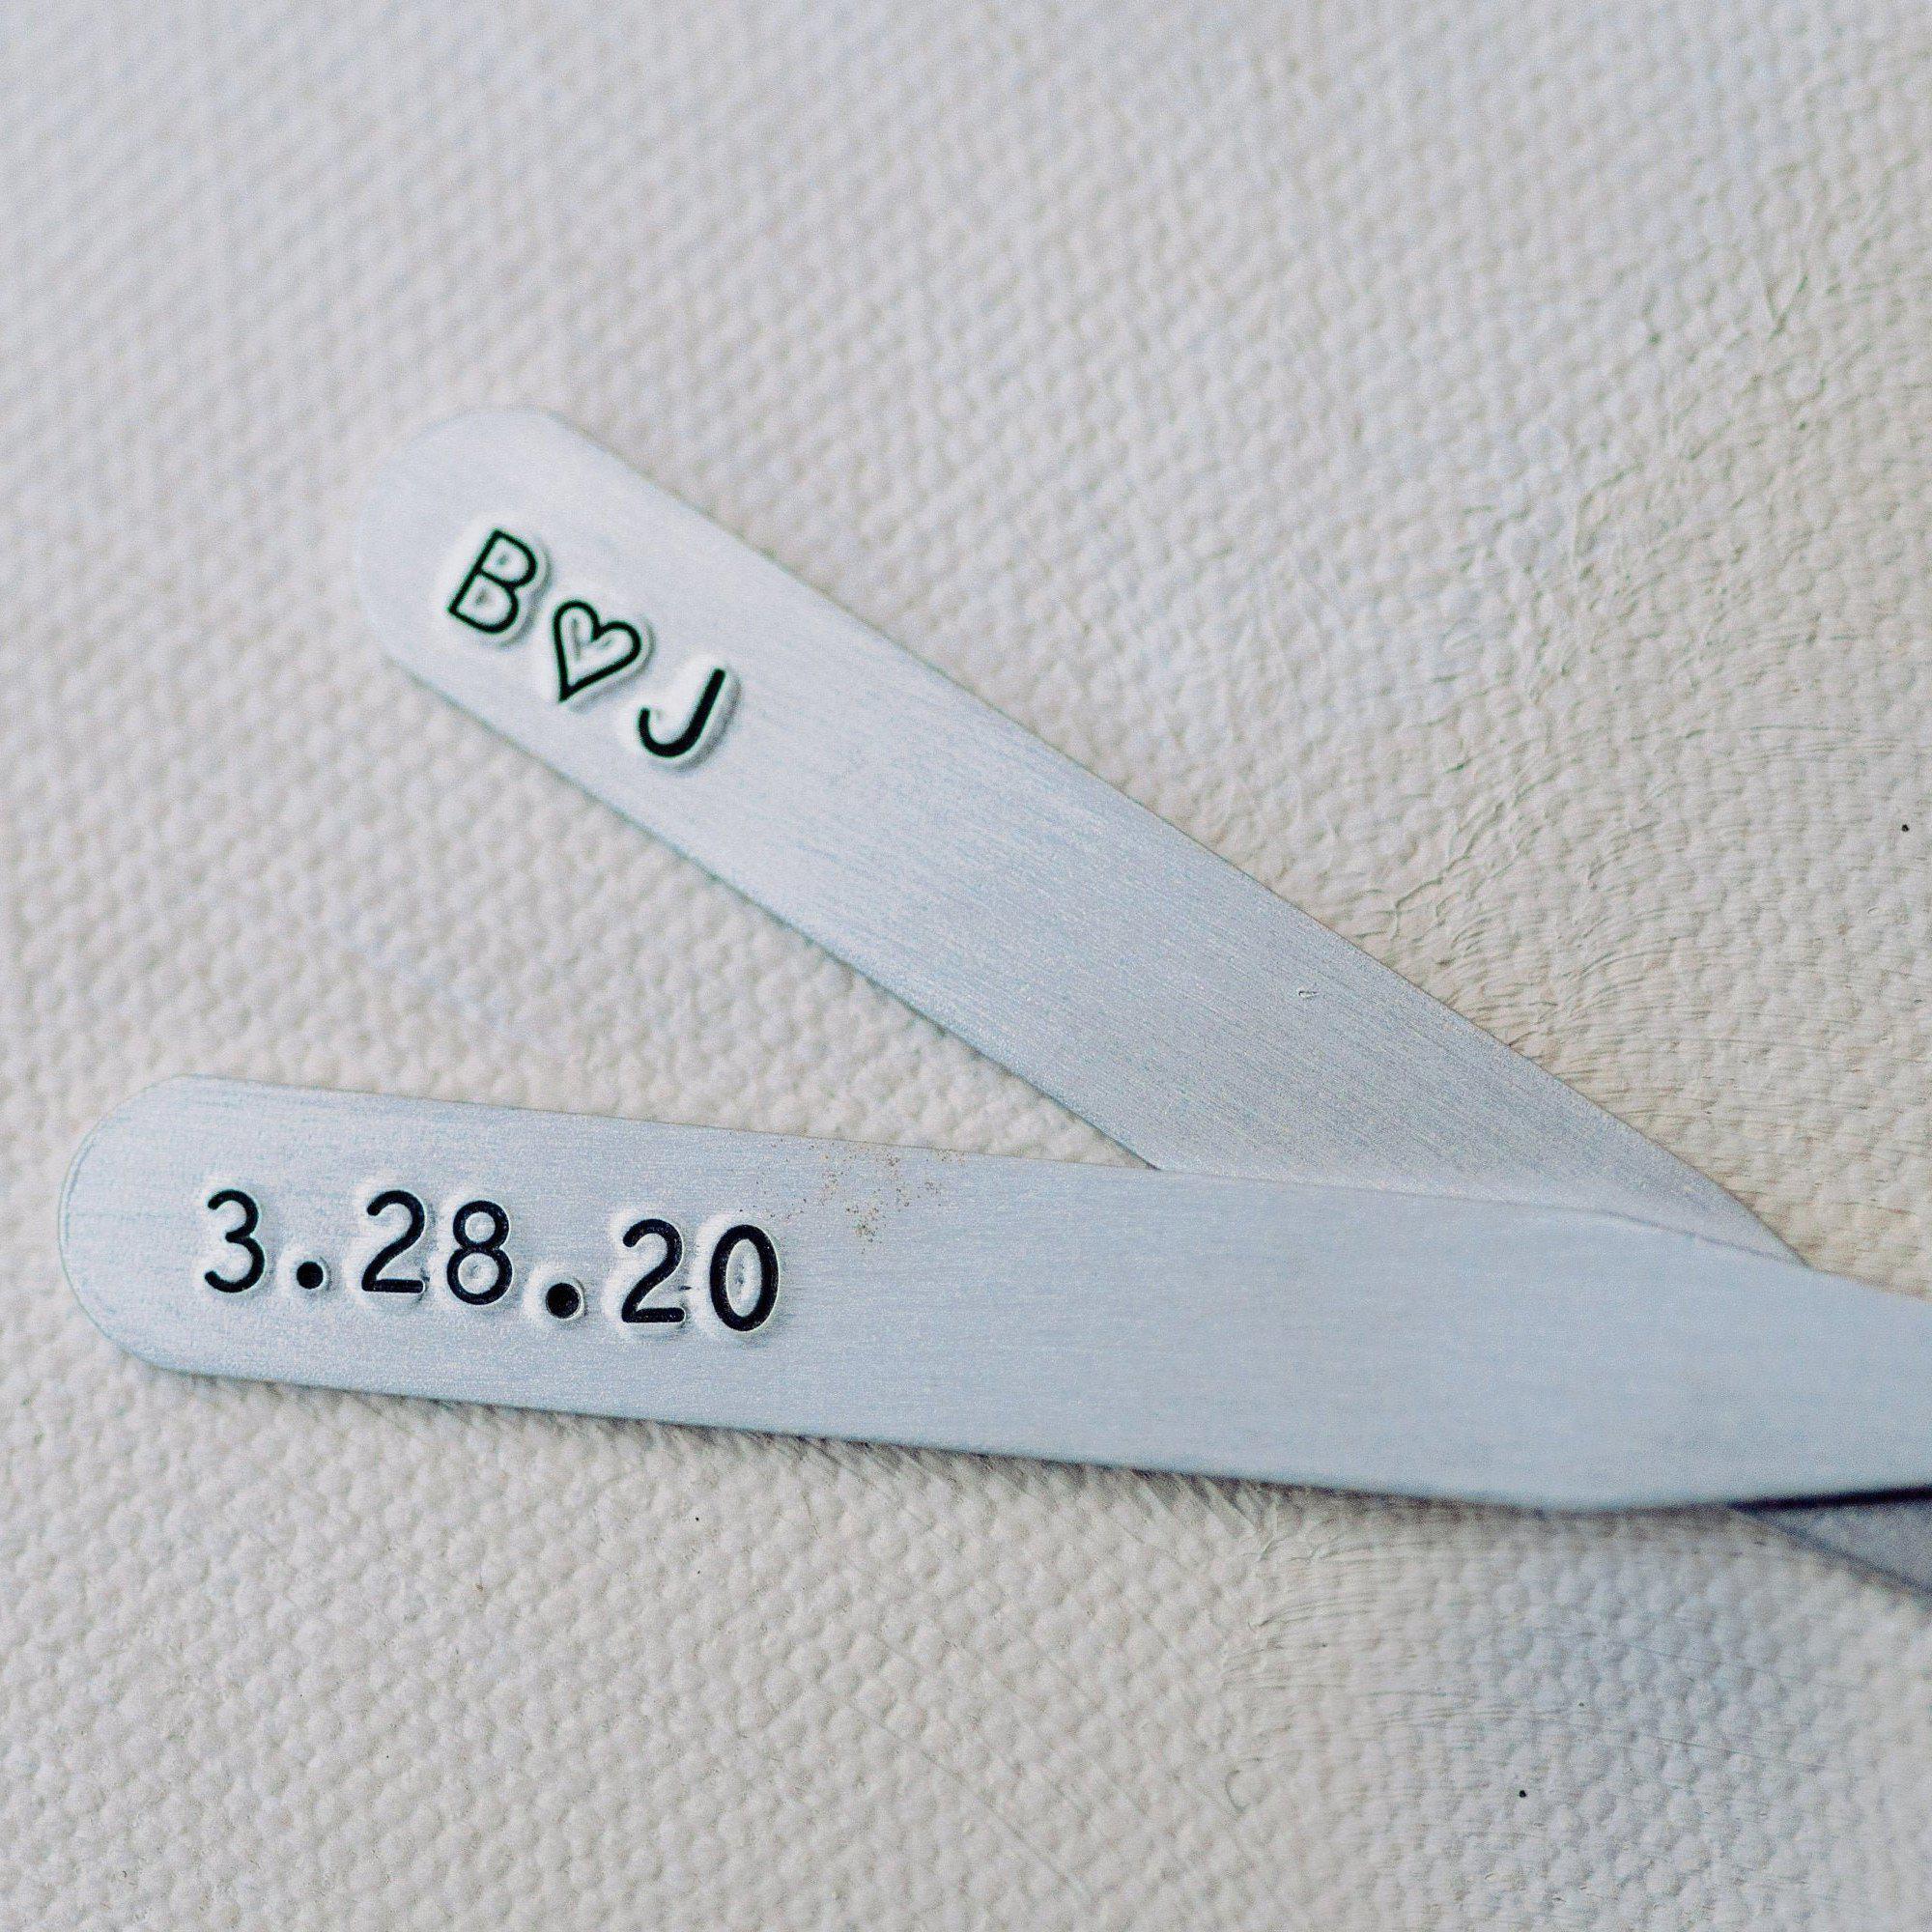 Personalized Collar Stays with Initials and Date for Men Salt and Sparkle